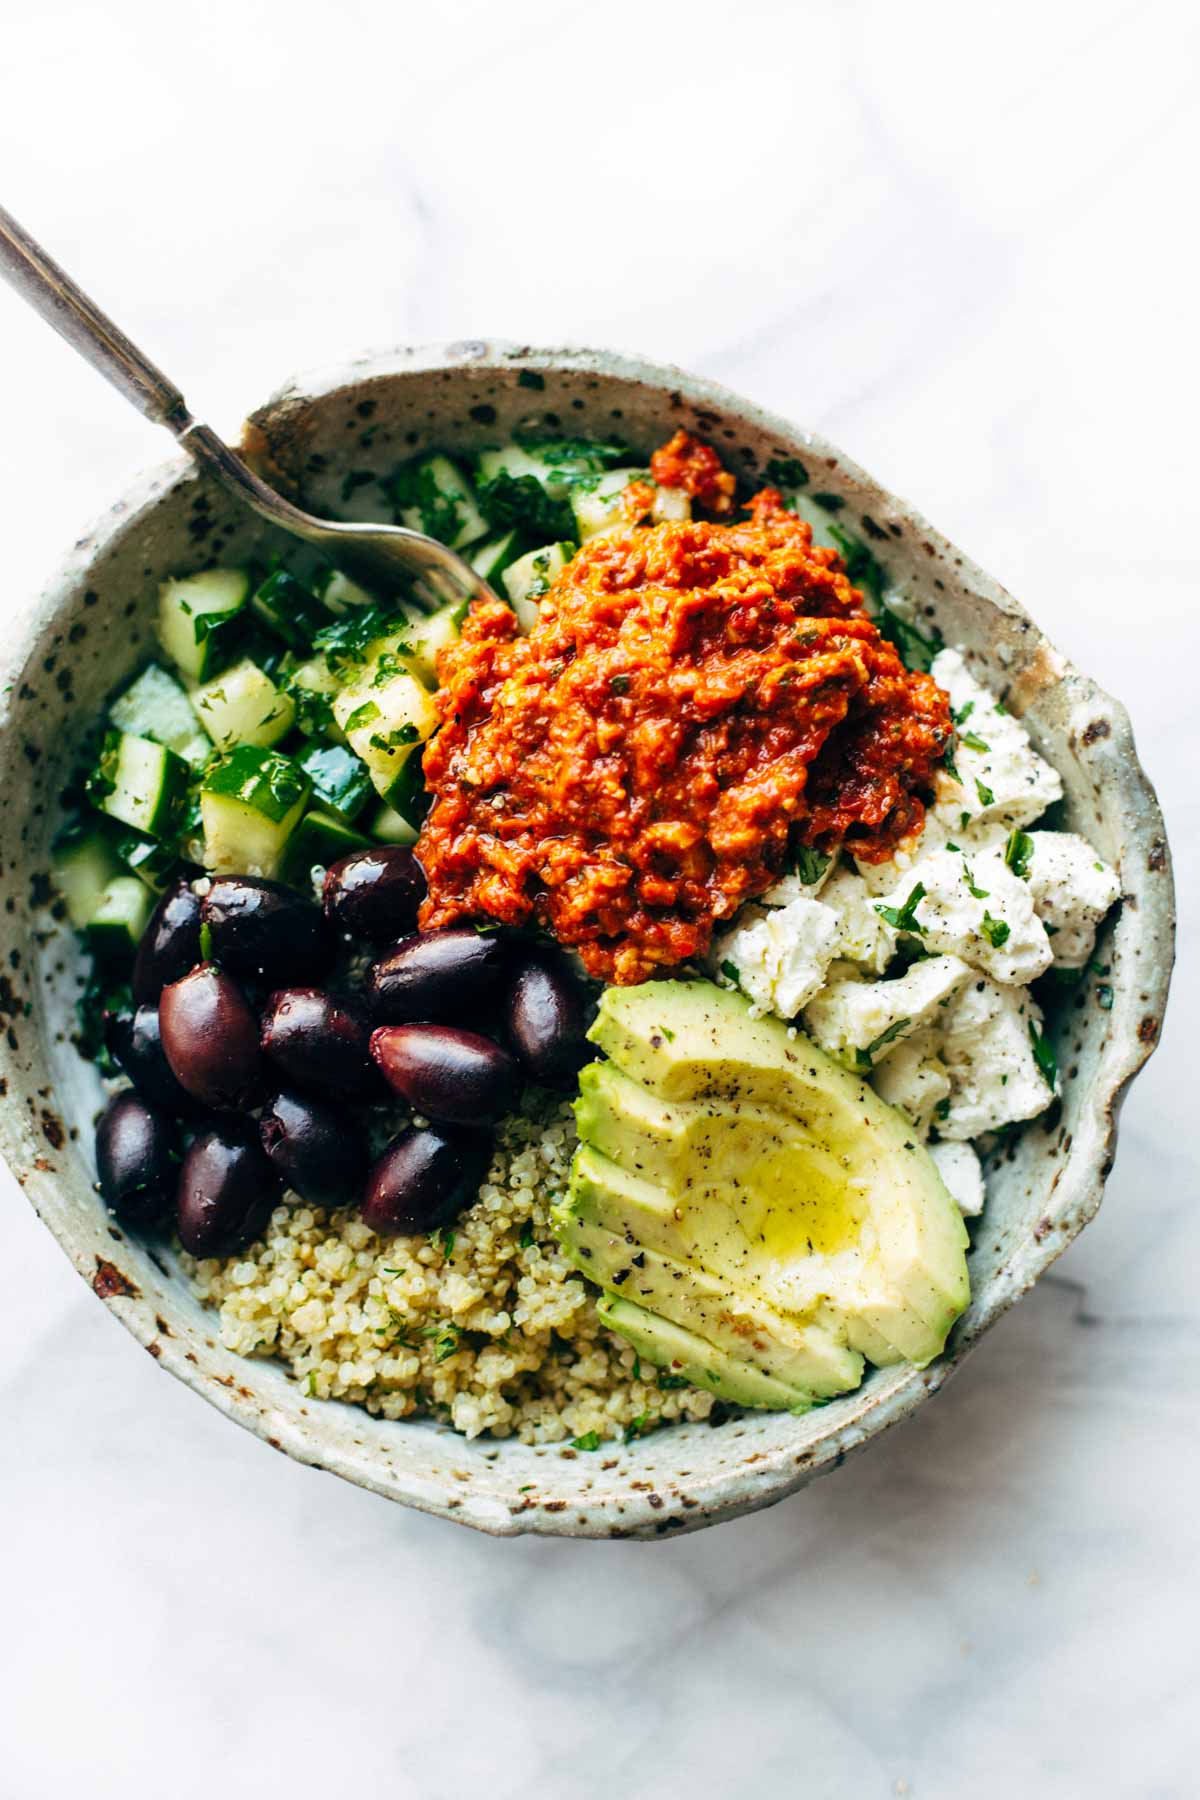 Mediterranean Quinoa Bowls with Roasted Red Pepper Sauce Recipe